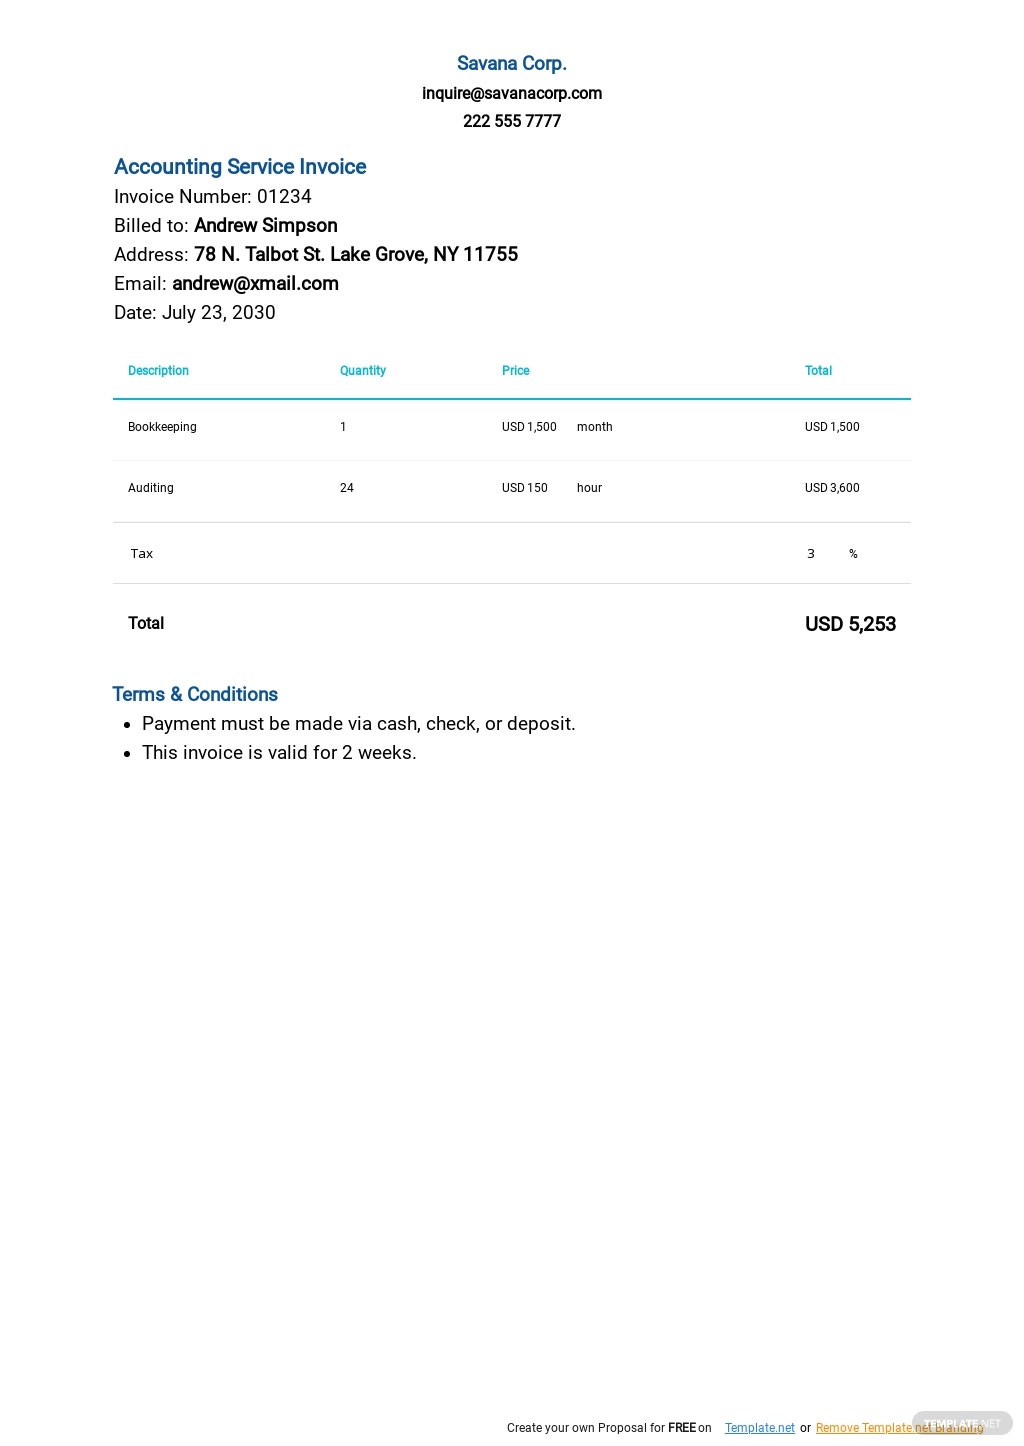 accounting service invoice template